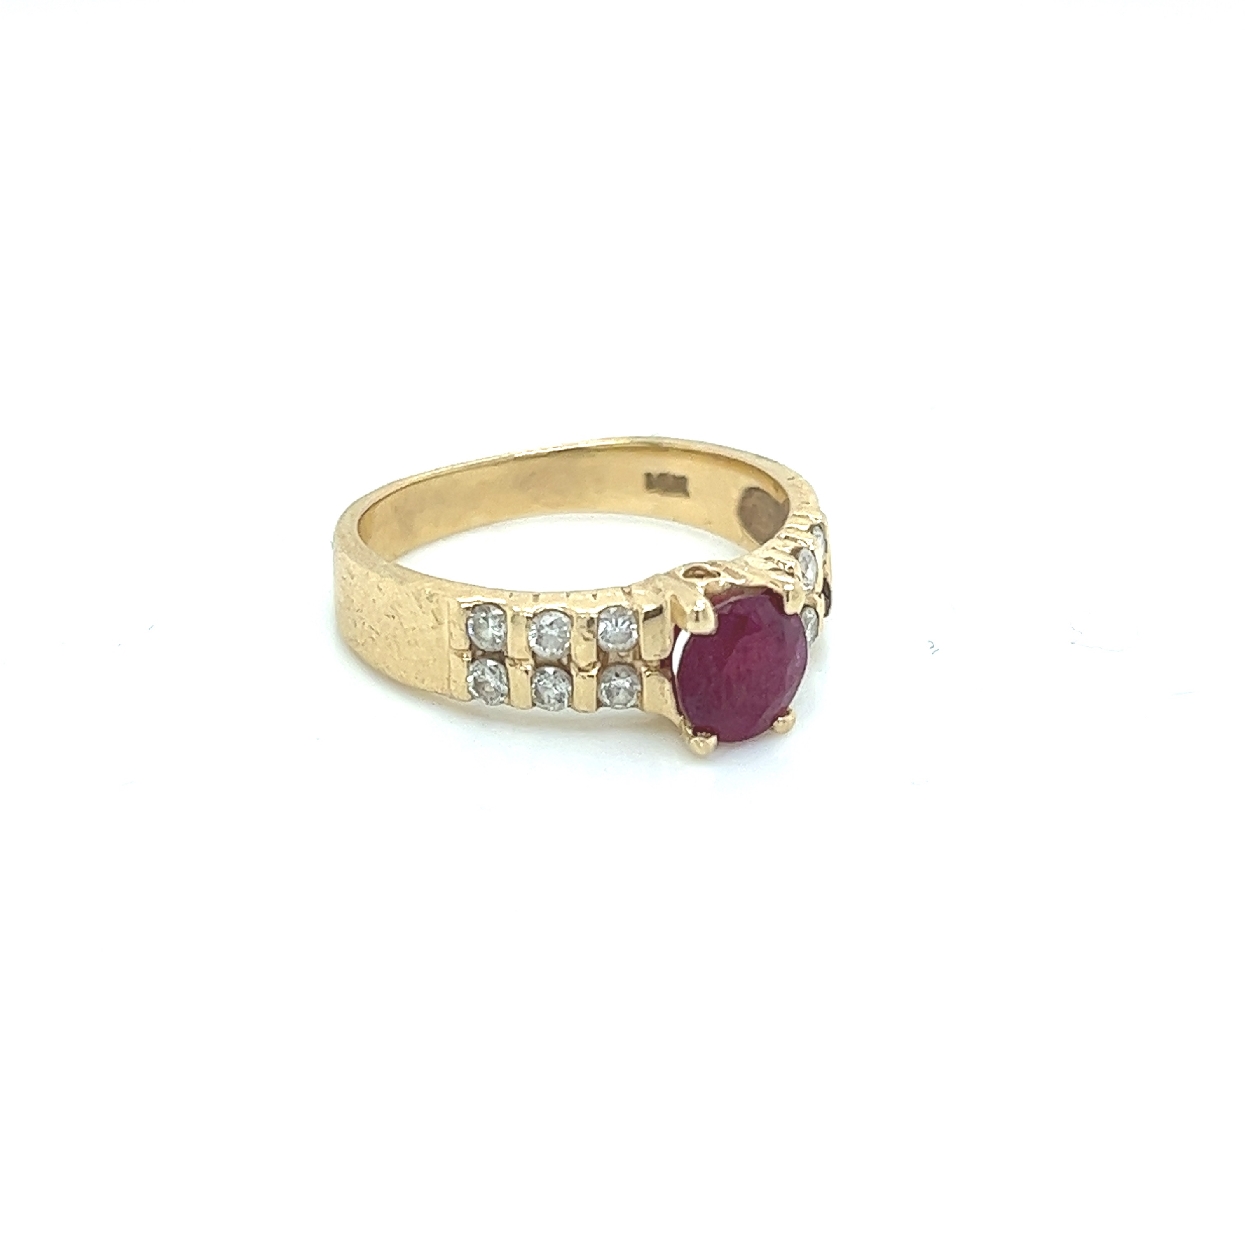 14K Round Ruby Ring with Two Rows of Diamond Accents

Size 5.75
 